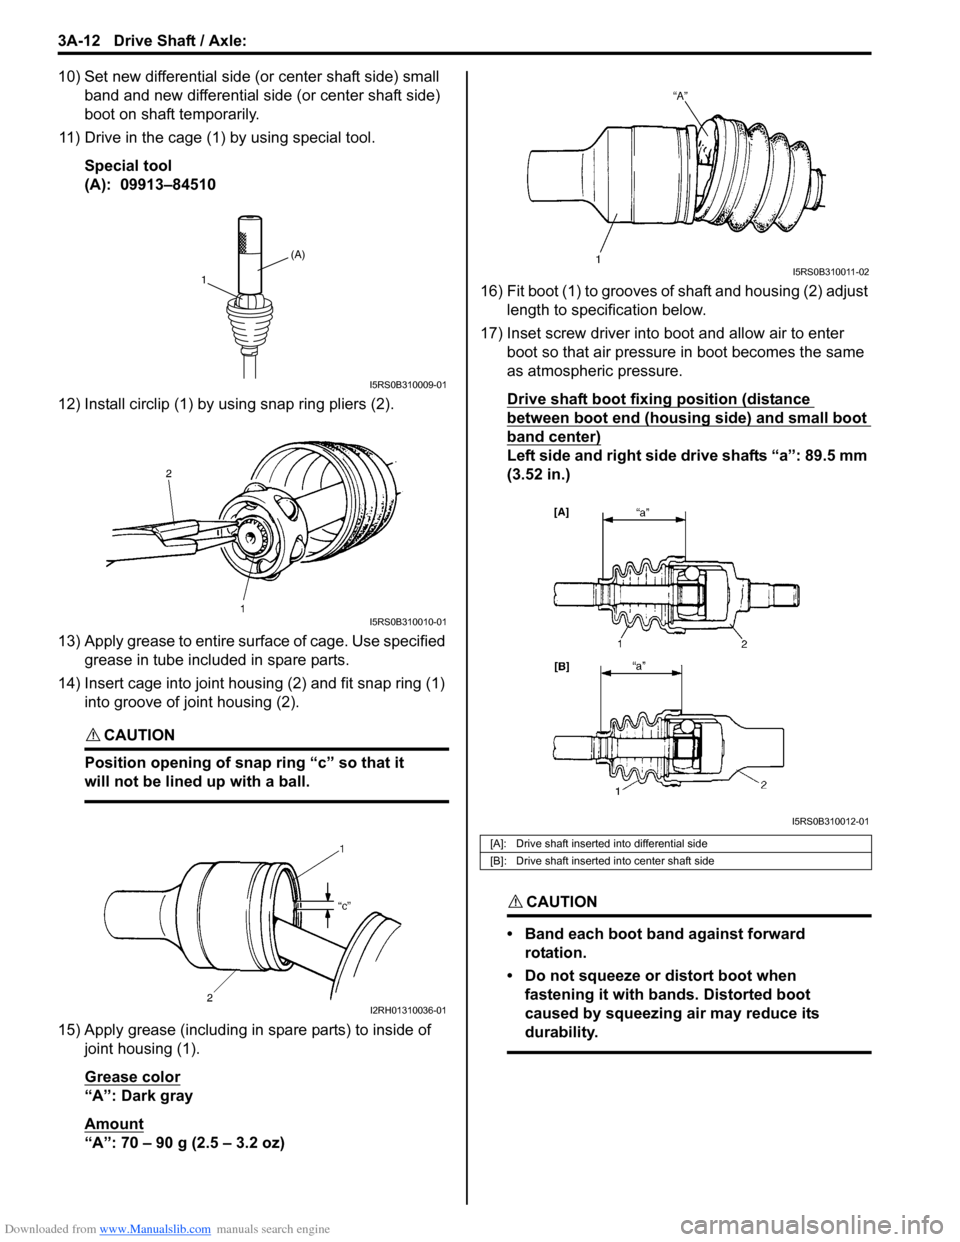 SUZUKI SWIFT 2007 2.G Service Workshop Manual Downloaded from www.Manualslib.com manuals search engine 3A-12 Drive Shaft / Axle: 
10) Set new differential side (or center shaft side) small band and new differential side (or center shaft side) 
bo